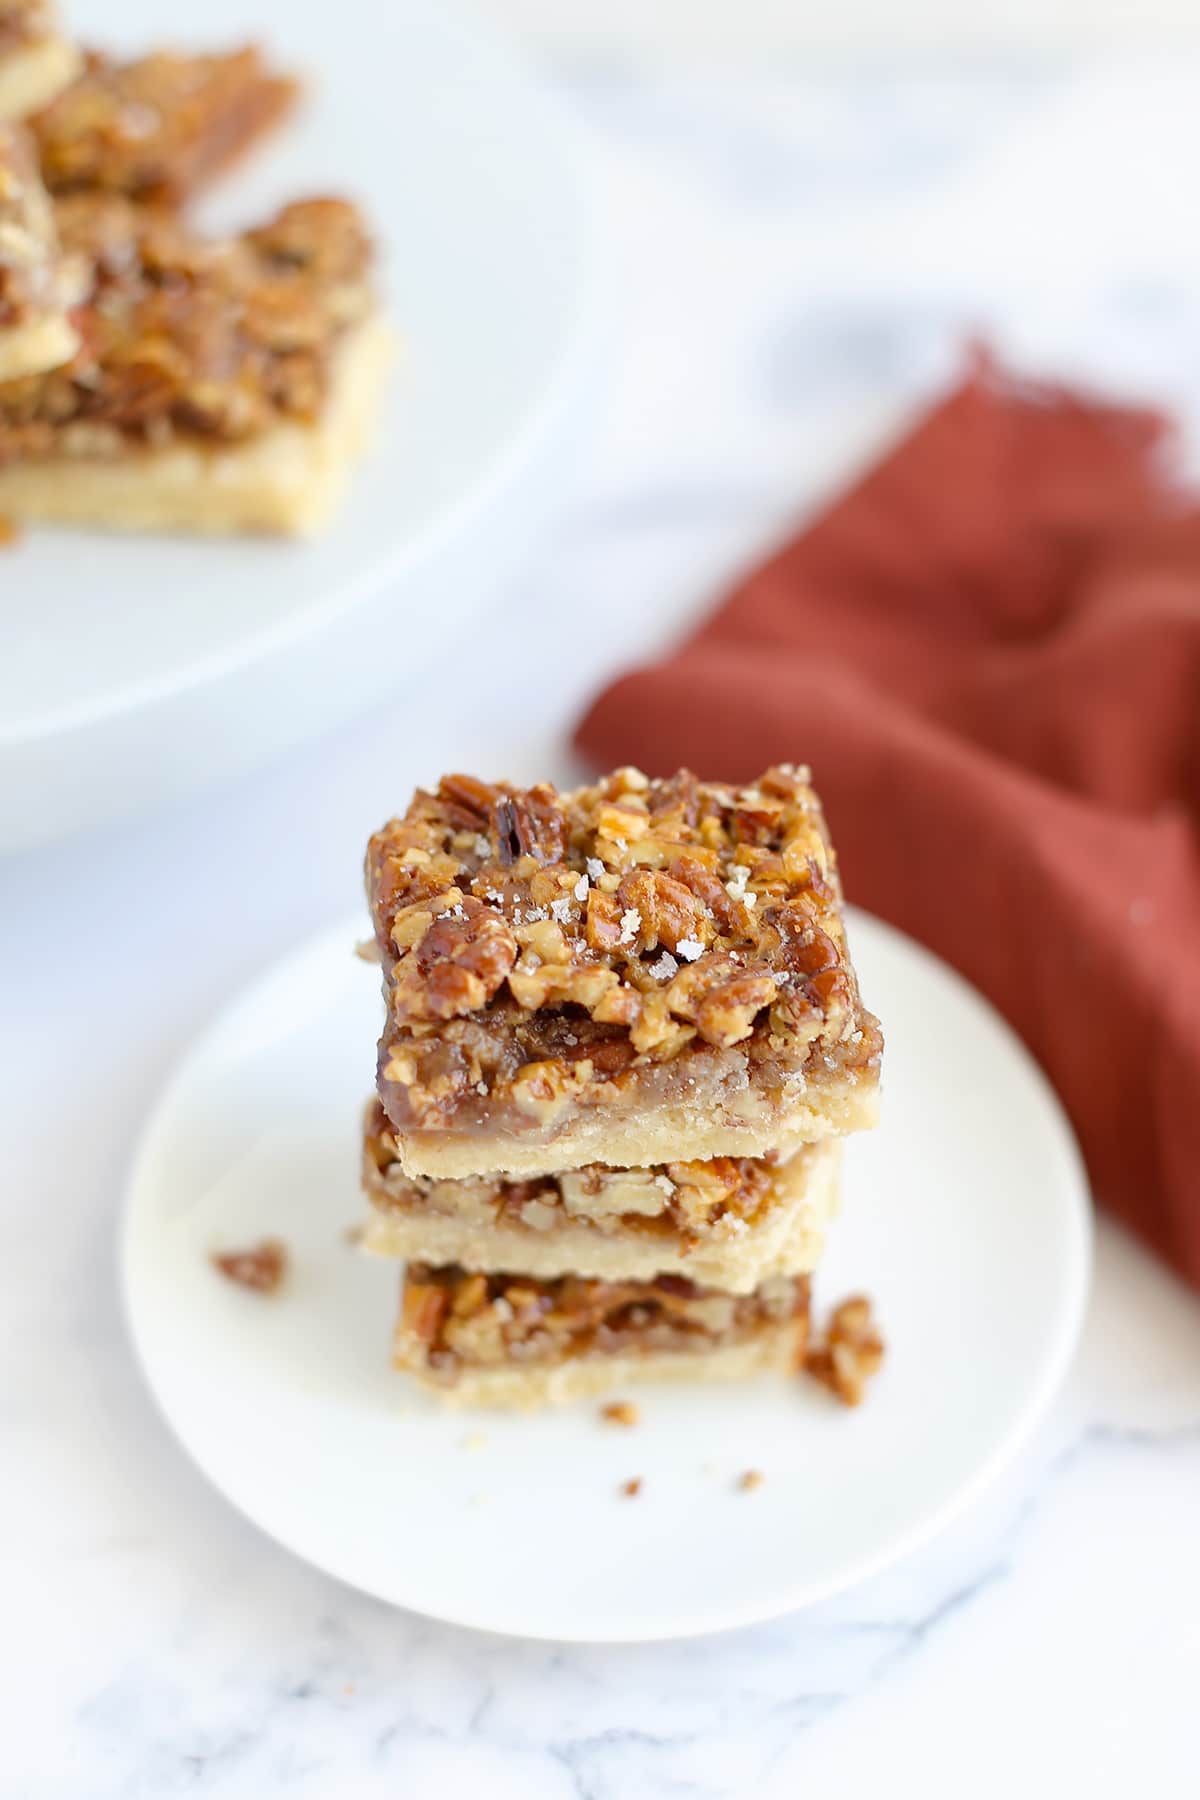 A stack of pecan pie bars sprinkled with flaked salt and stacked on a small serving plate with a red linen in the background.